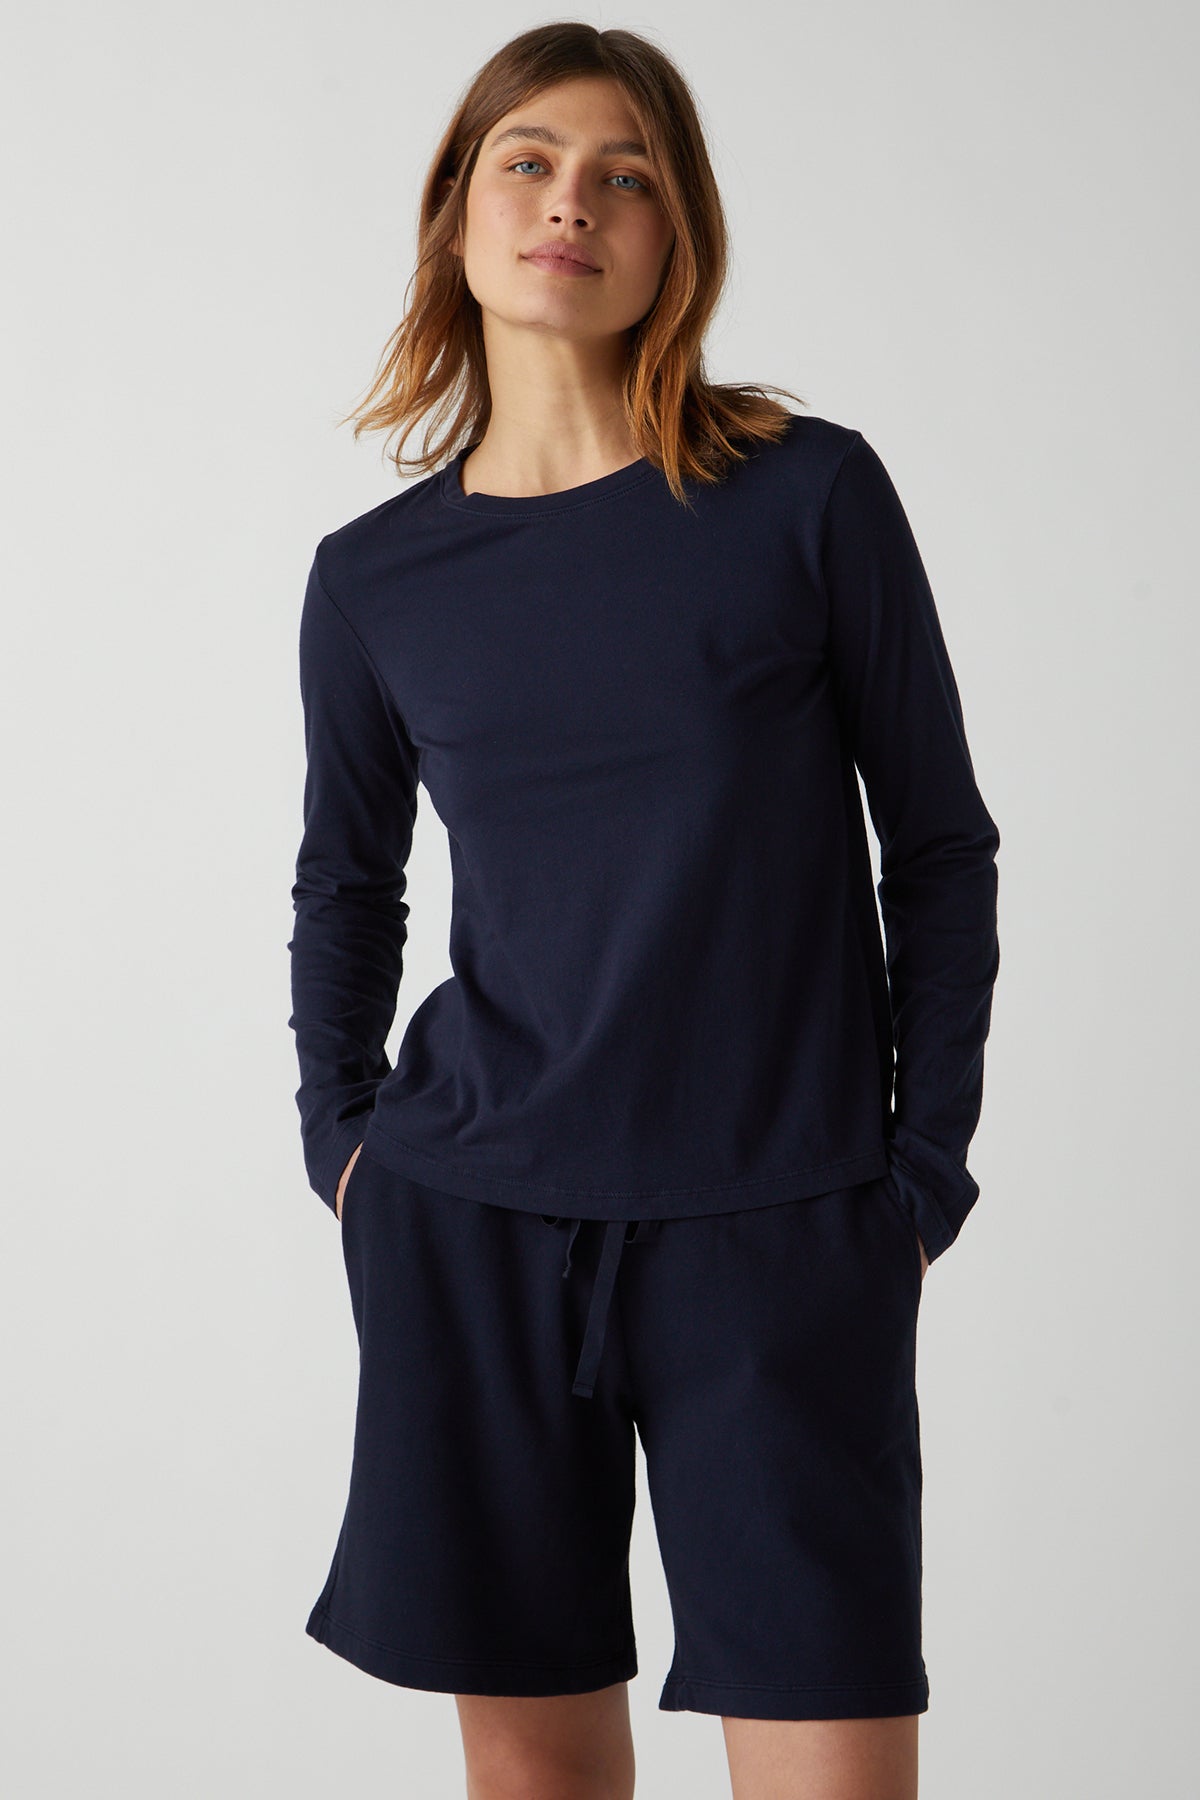   the model is wearing a navy long-sleeved top and Velvet by Jenny Graham LAGUNA SWEATSHORT. 